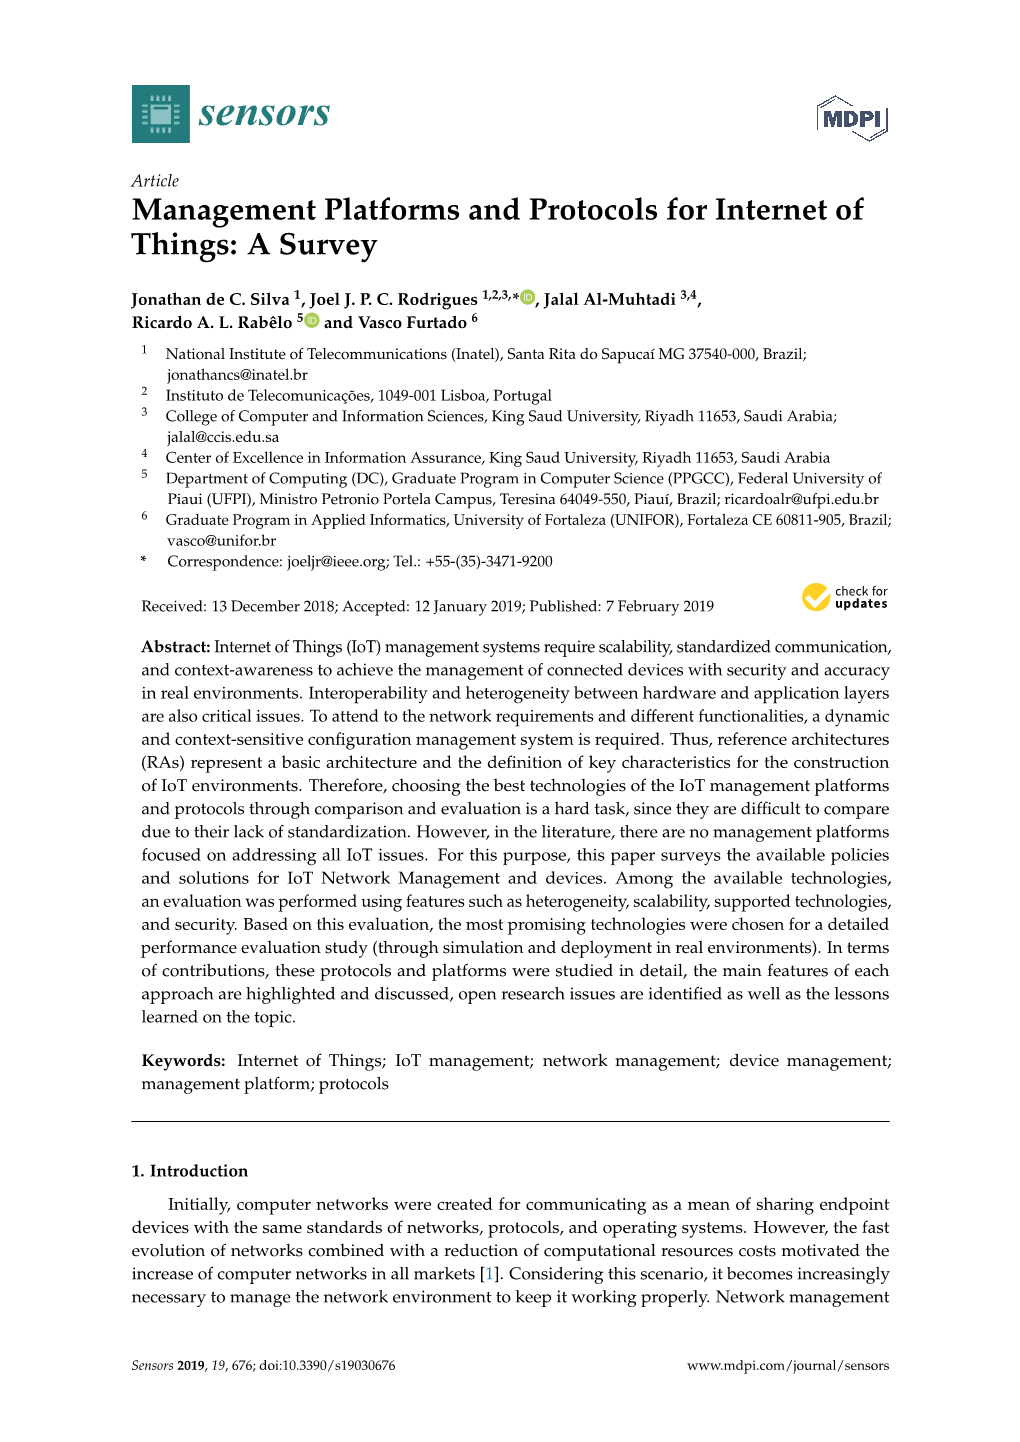 Management Platforms and Protocols for Internet of Things: a Survey